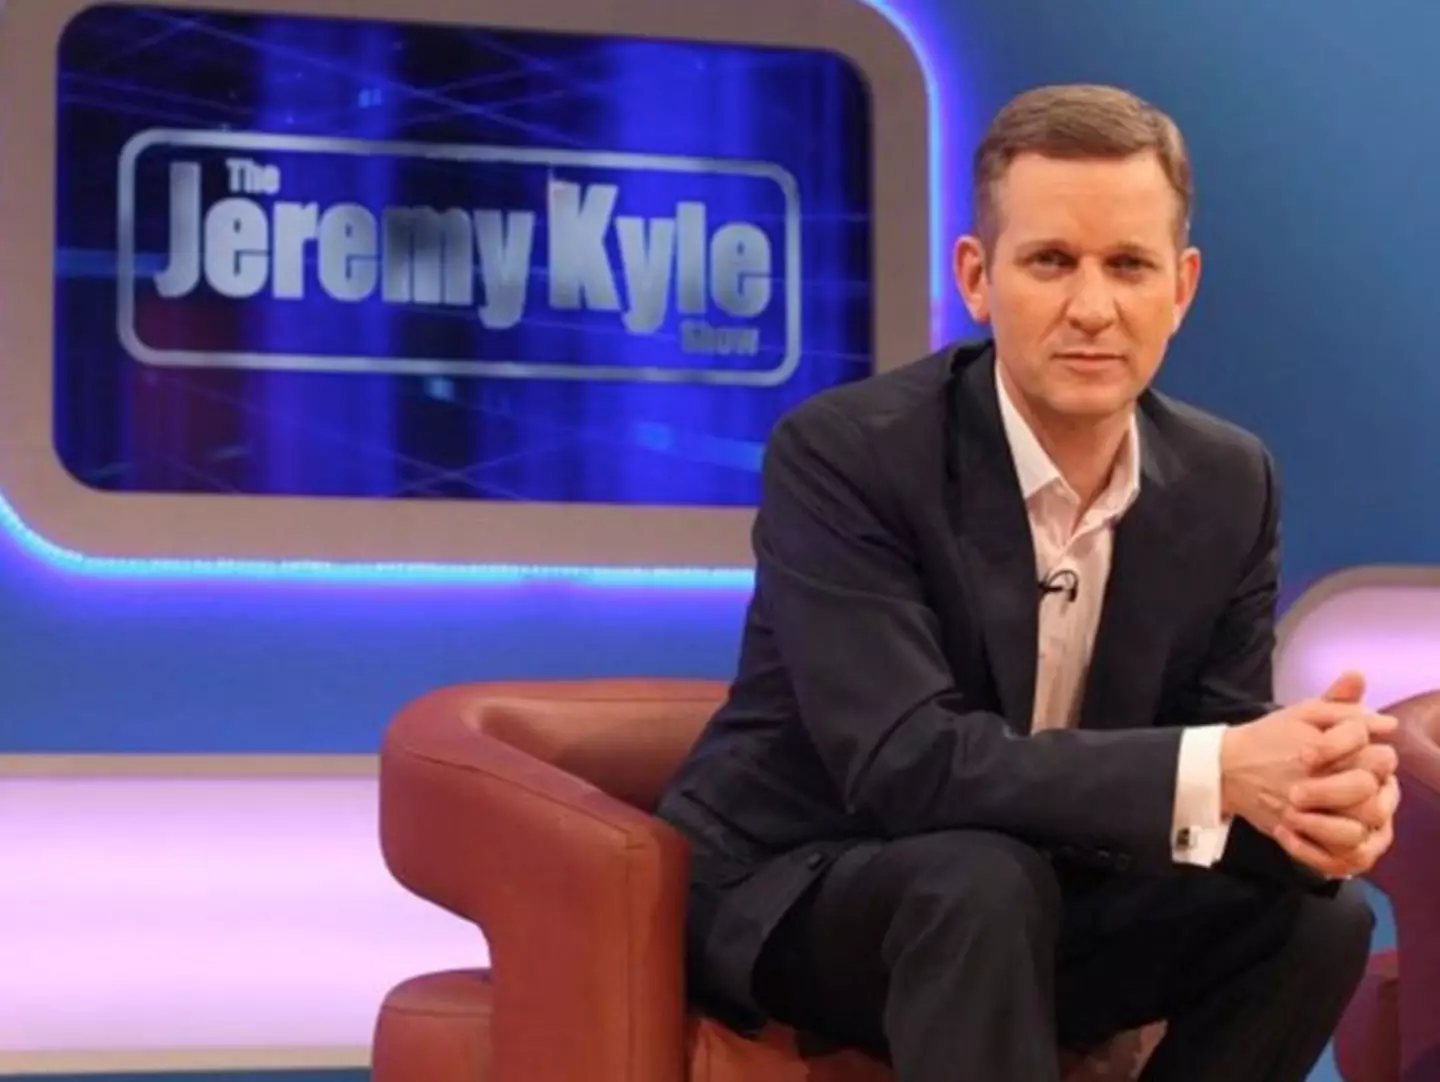 Jeremy Kyle has been branded a 'bully'.